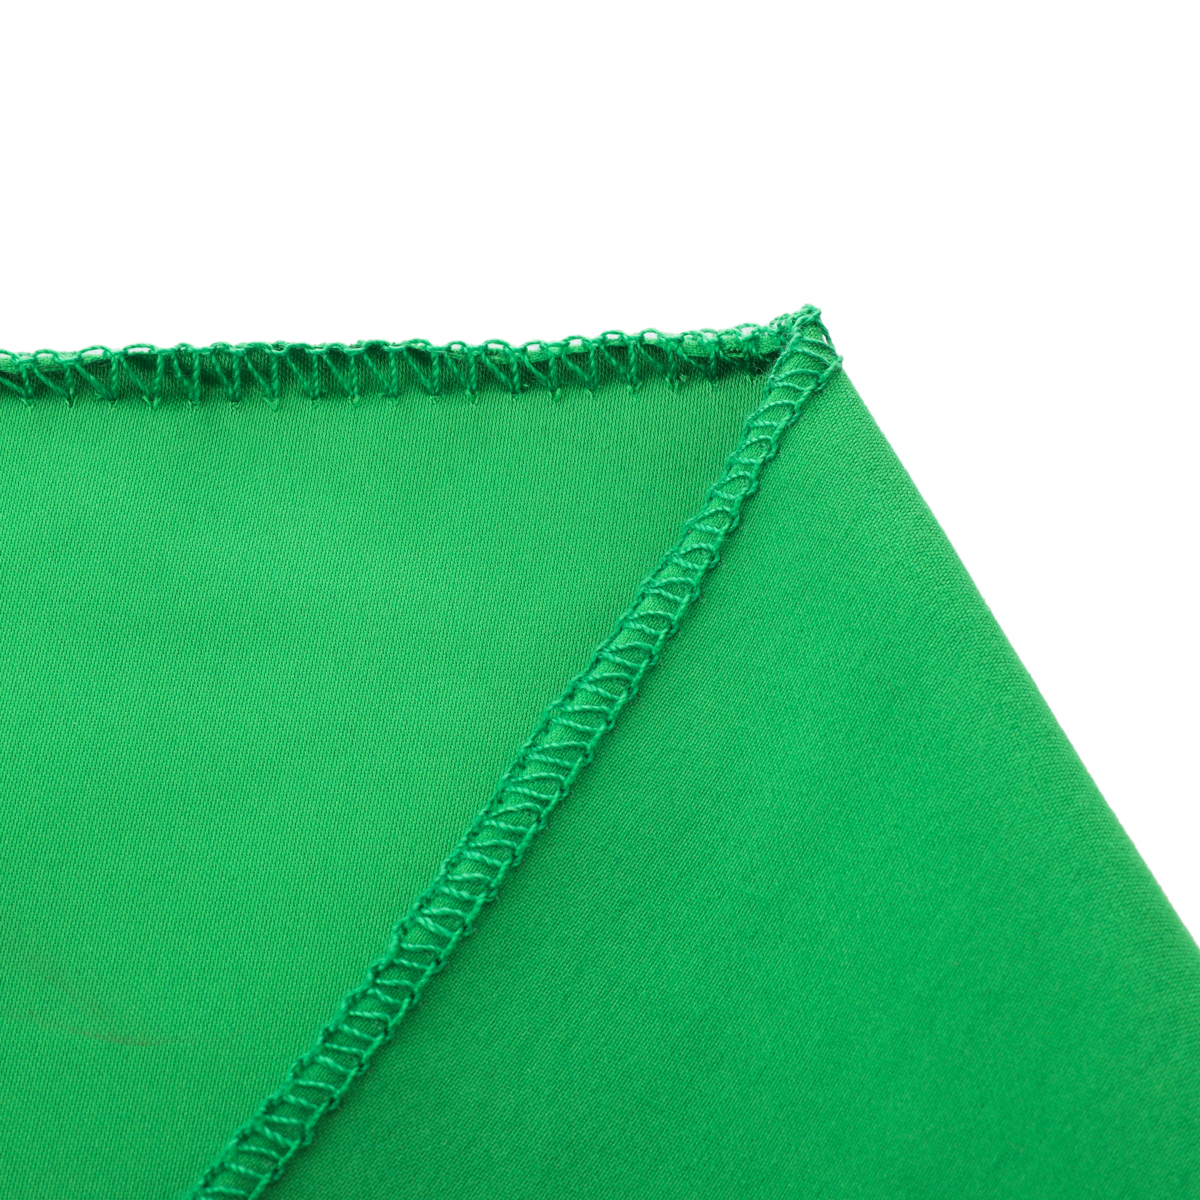 Find 7x5FT Green Photography Backdrop Background Studio Photography Prop for Sale on Gipsybee.com with cryptocurrencies